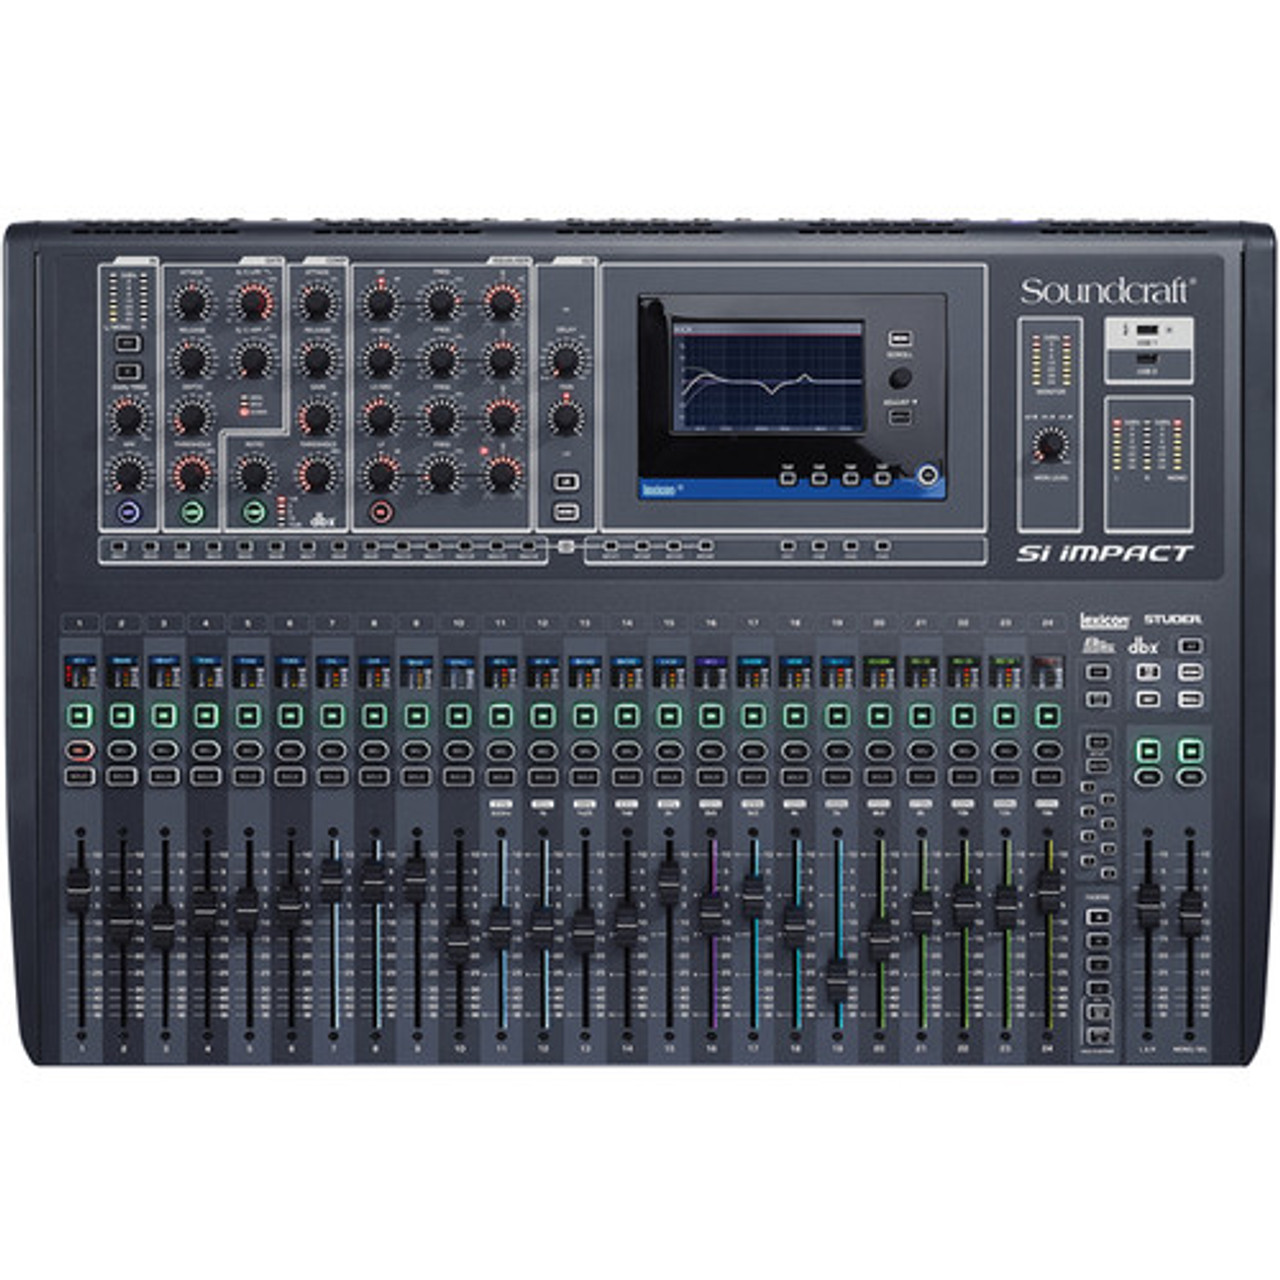 Soundcraft Si Impact 40-Input Digital Mixing Console and 32-In/32-Out USB Interface (5056170)